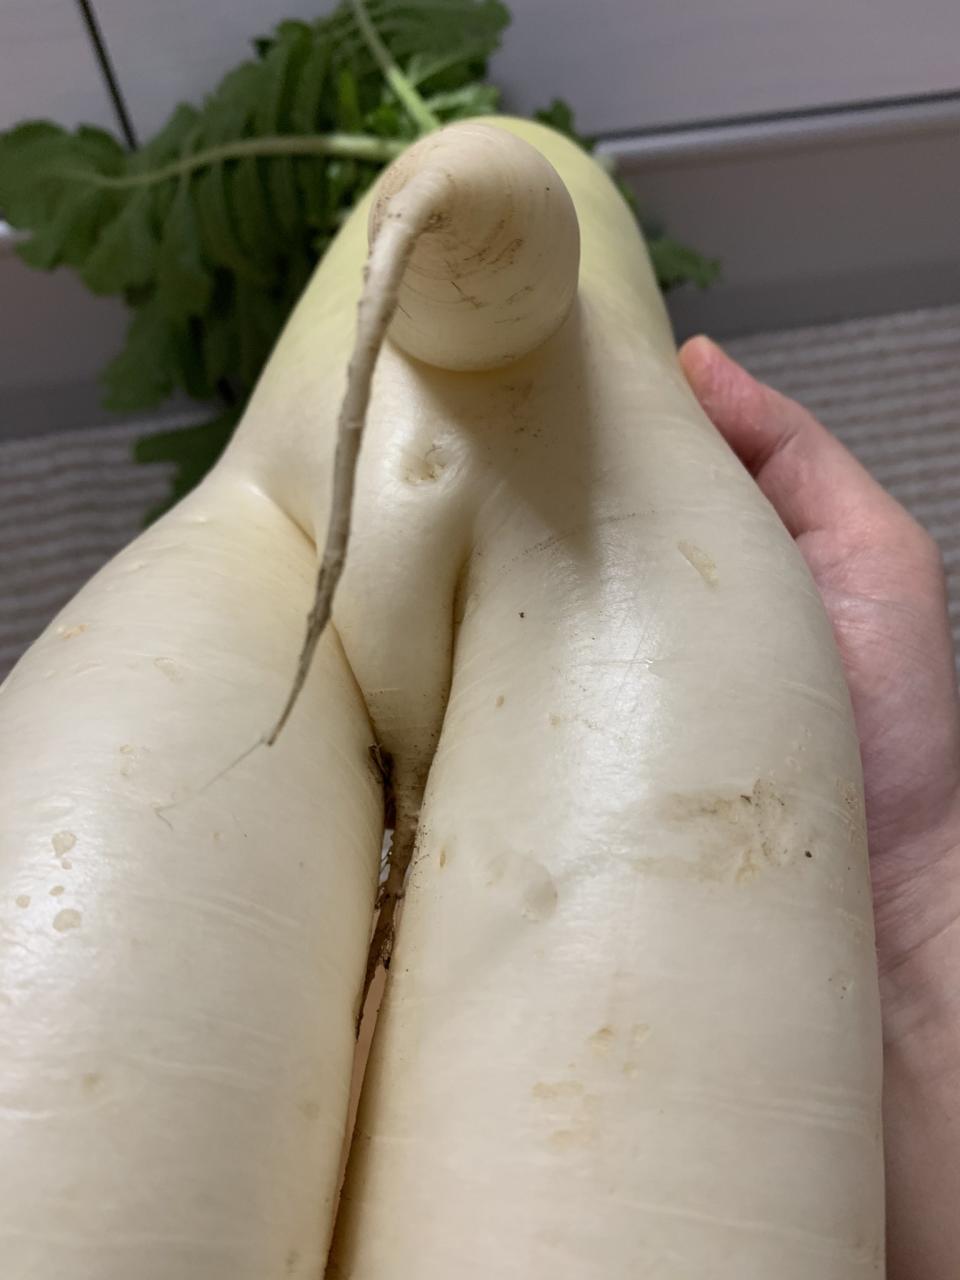 A strange radish, or daikon, from Japan came with an appendage that looks like a penis.